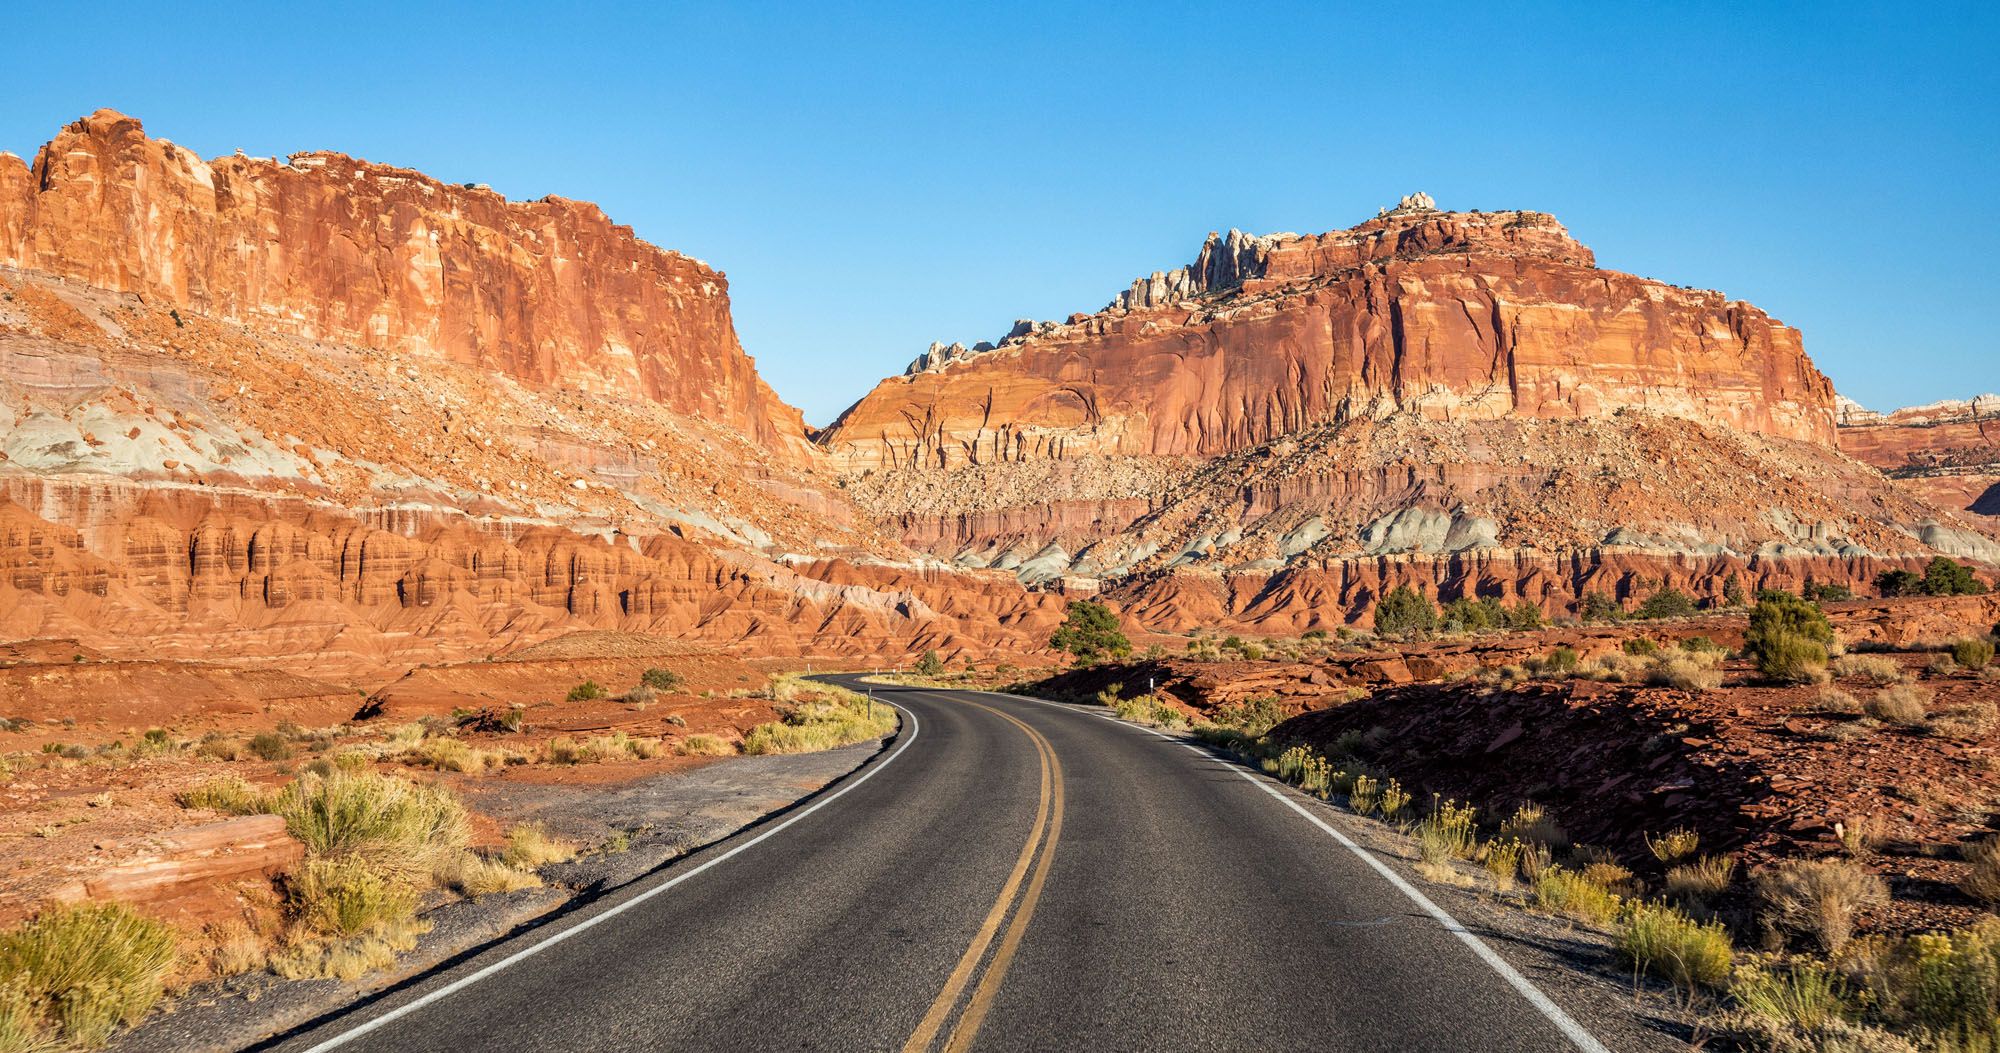 Featured image for “Arches, Canyonlands and Capitol Reef National Parks: 10 Day Road Trip Itinerary”